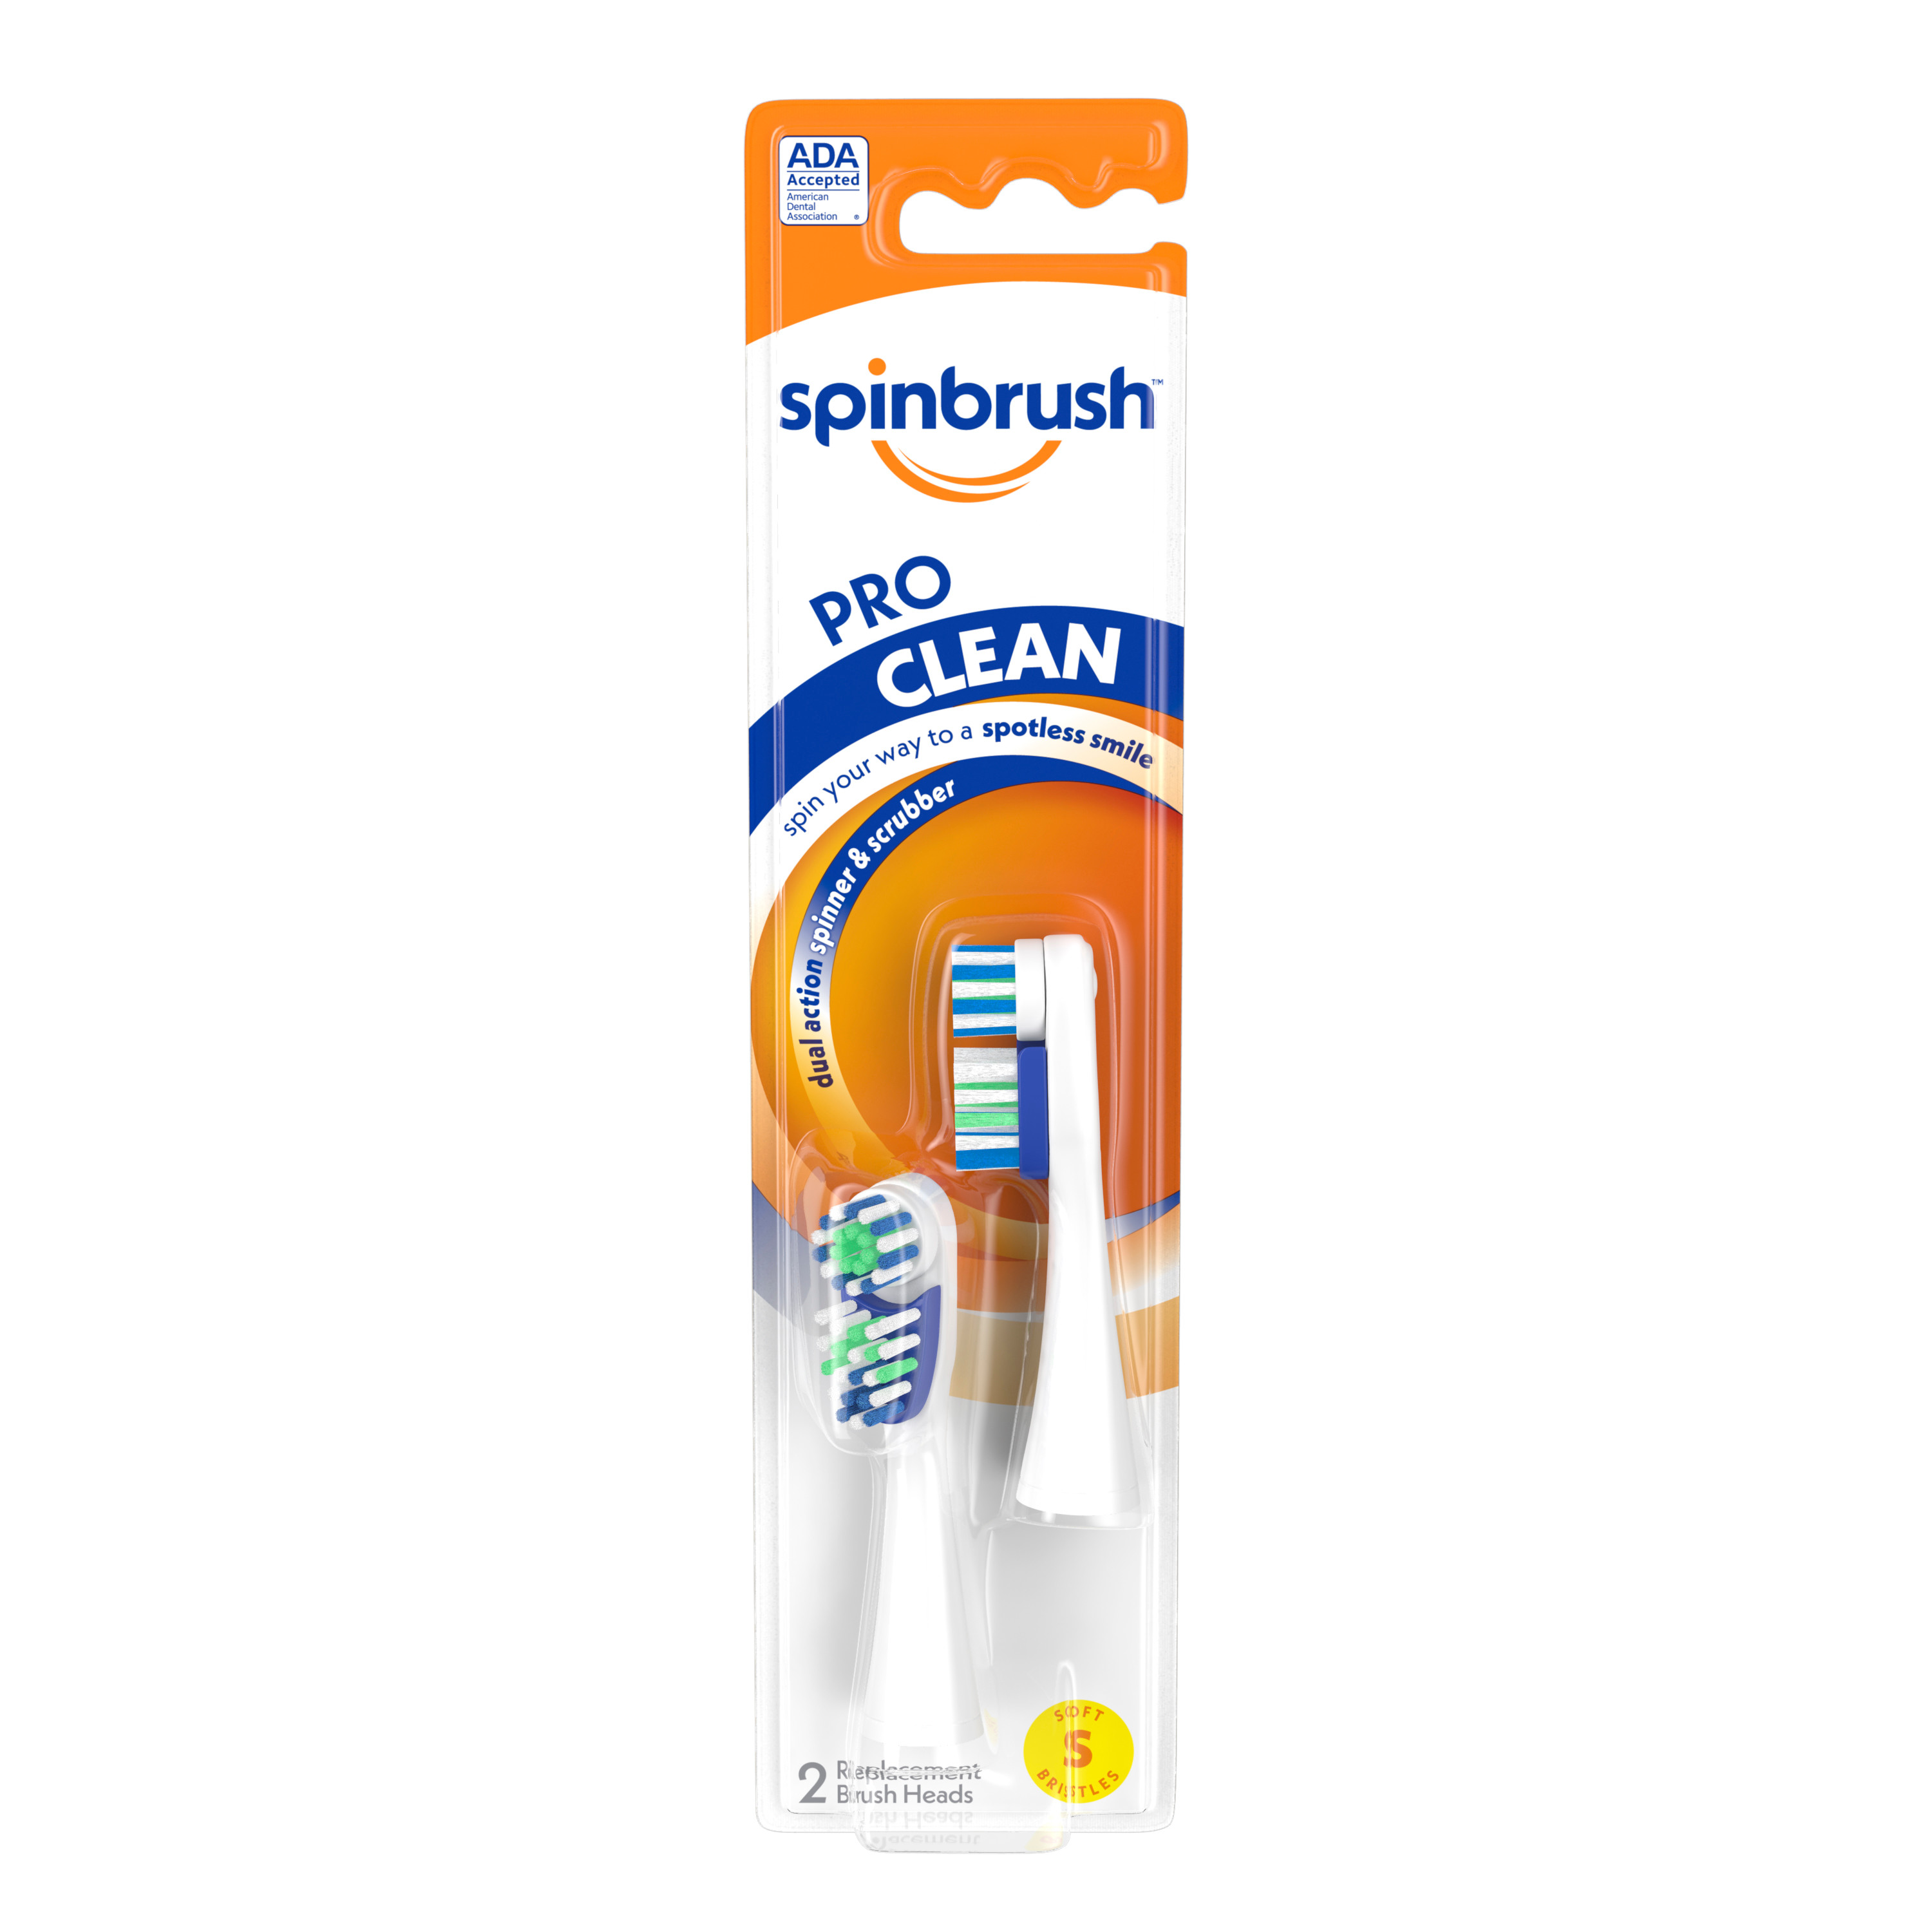 Spinbrush PRO CLEAN Refill, Soft Bristles, 2 Replacement Heads for Battery Powered Toothbrushes - image 1 of 8